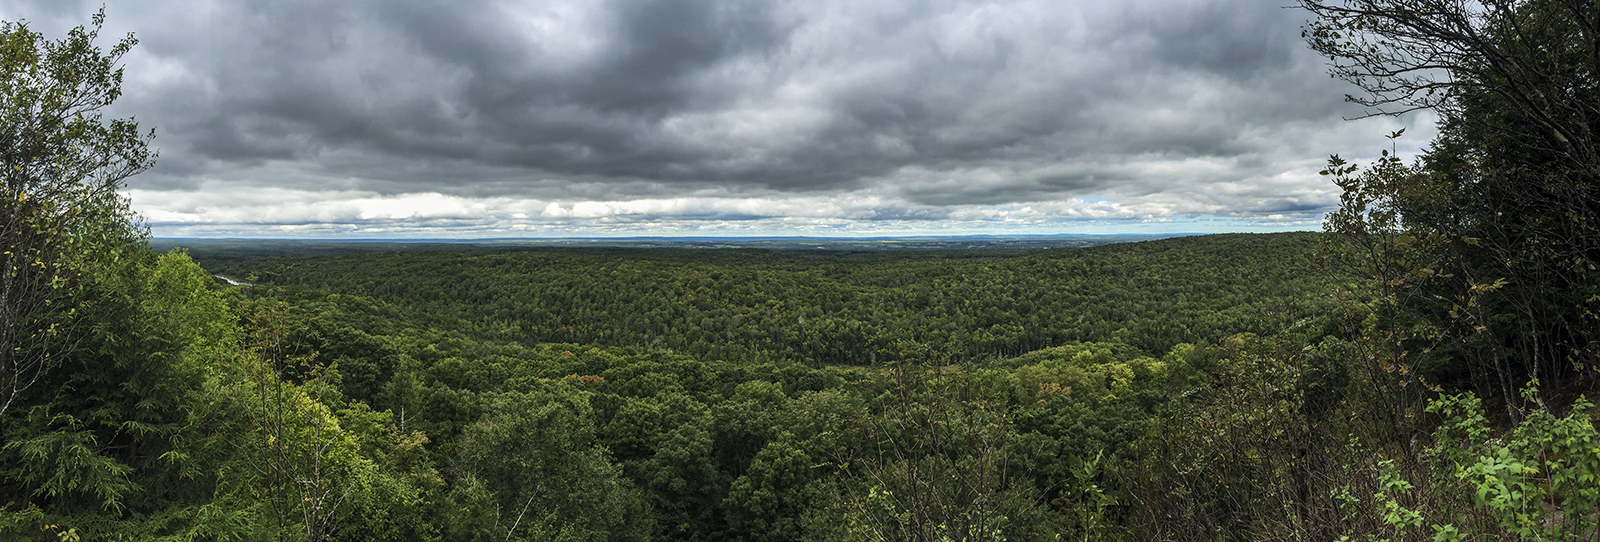 View from St. Peter's Dome of the Chequamegon National Forest